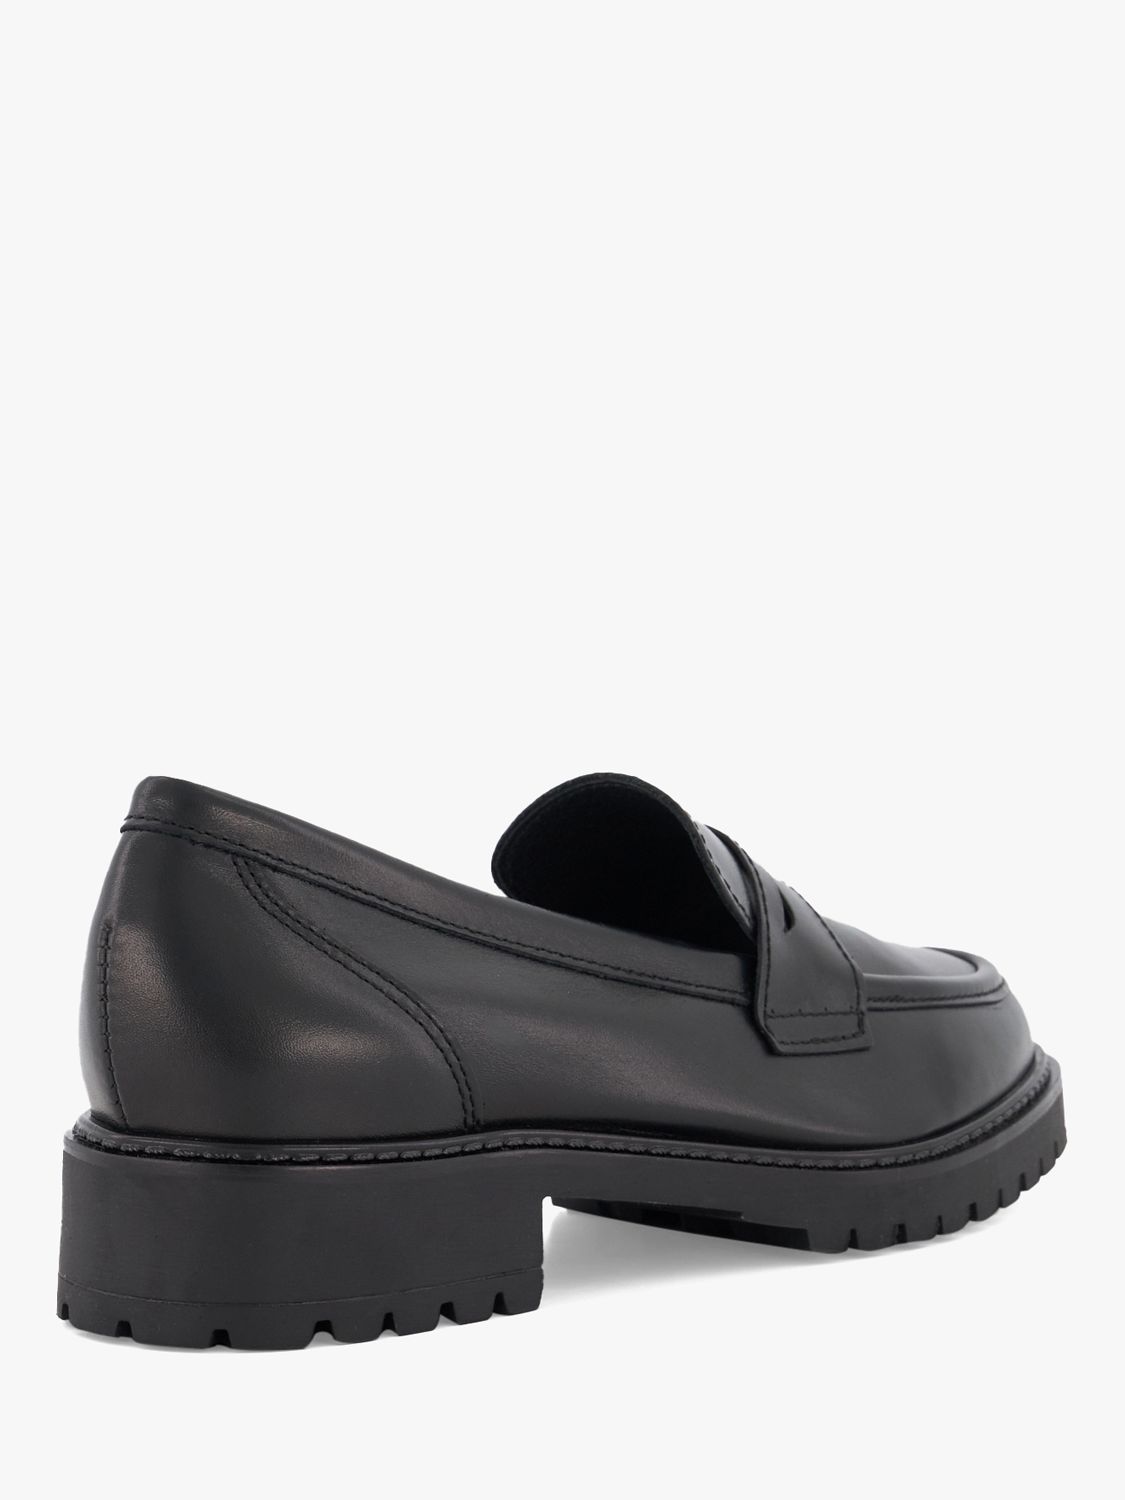 Dune Wide Fit Gild Leather Loafers, Black at John Lewis & Partners